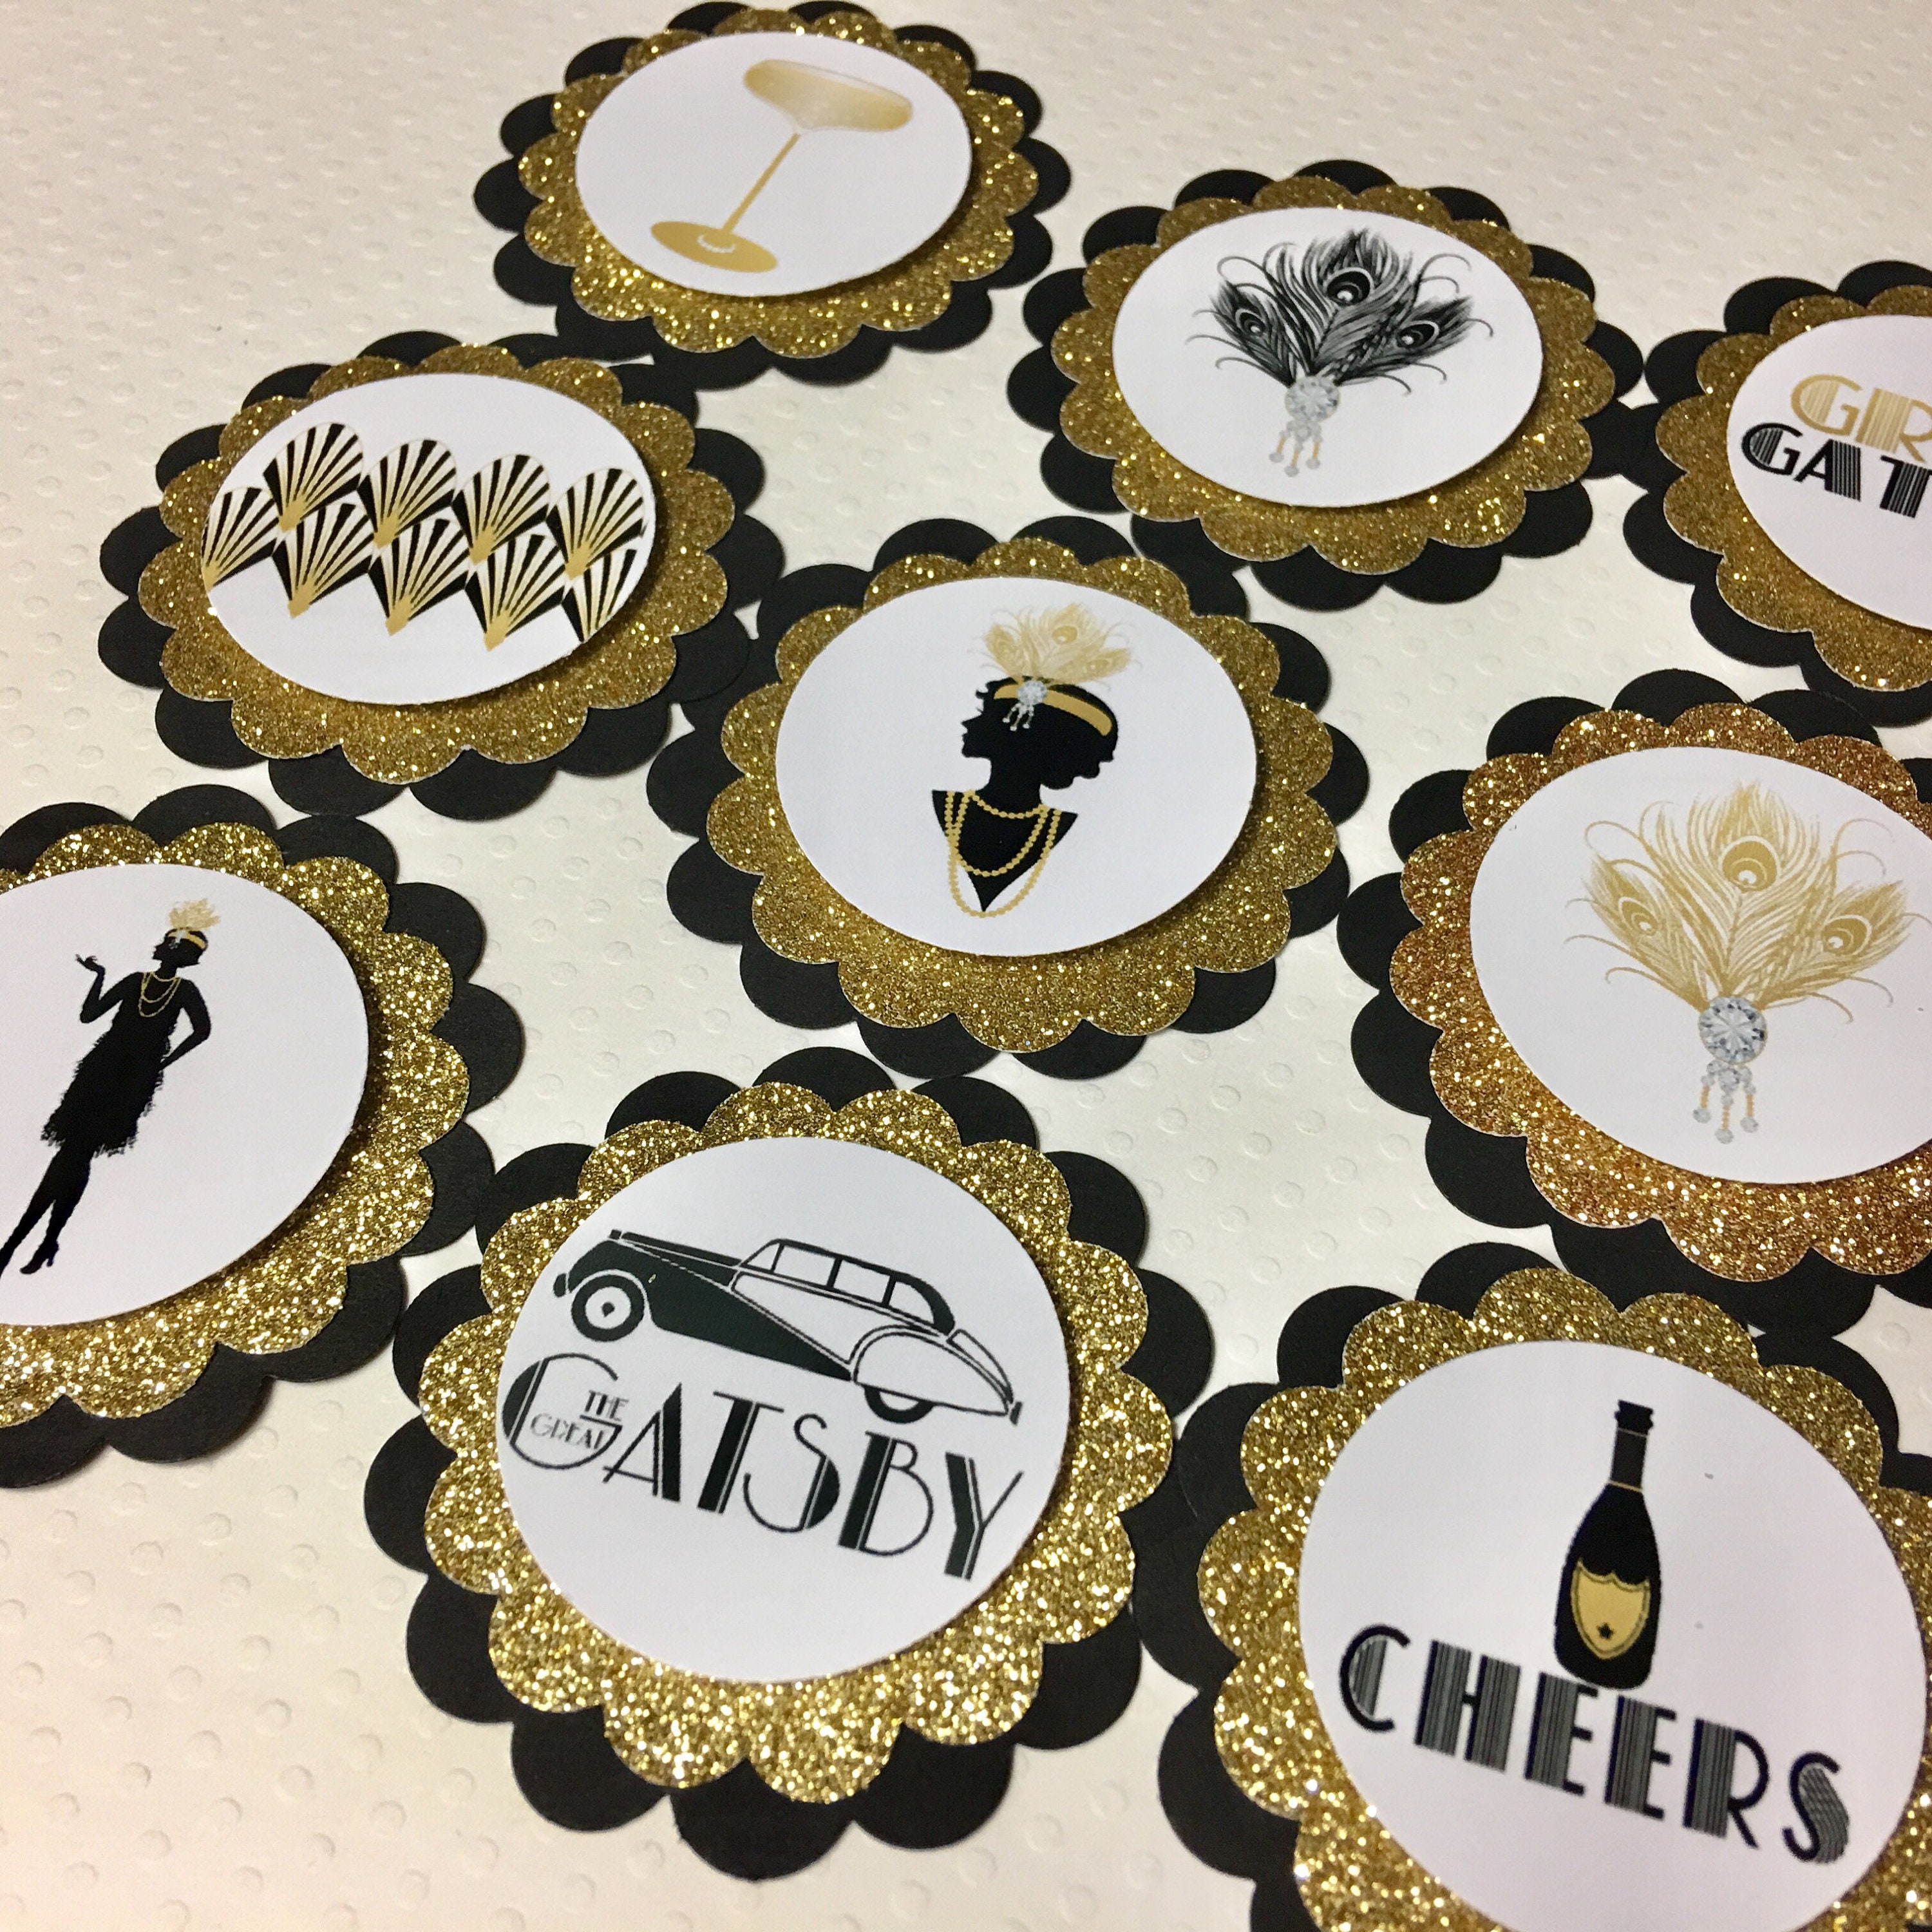 6 Roaring 20s Party Decorations Bundle, Great Gatsby, 1920s Decor